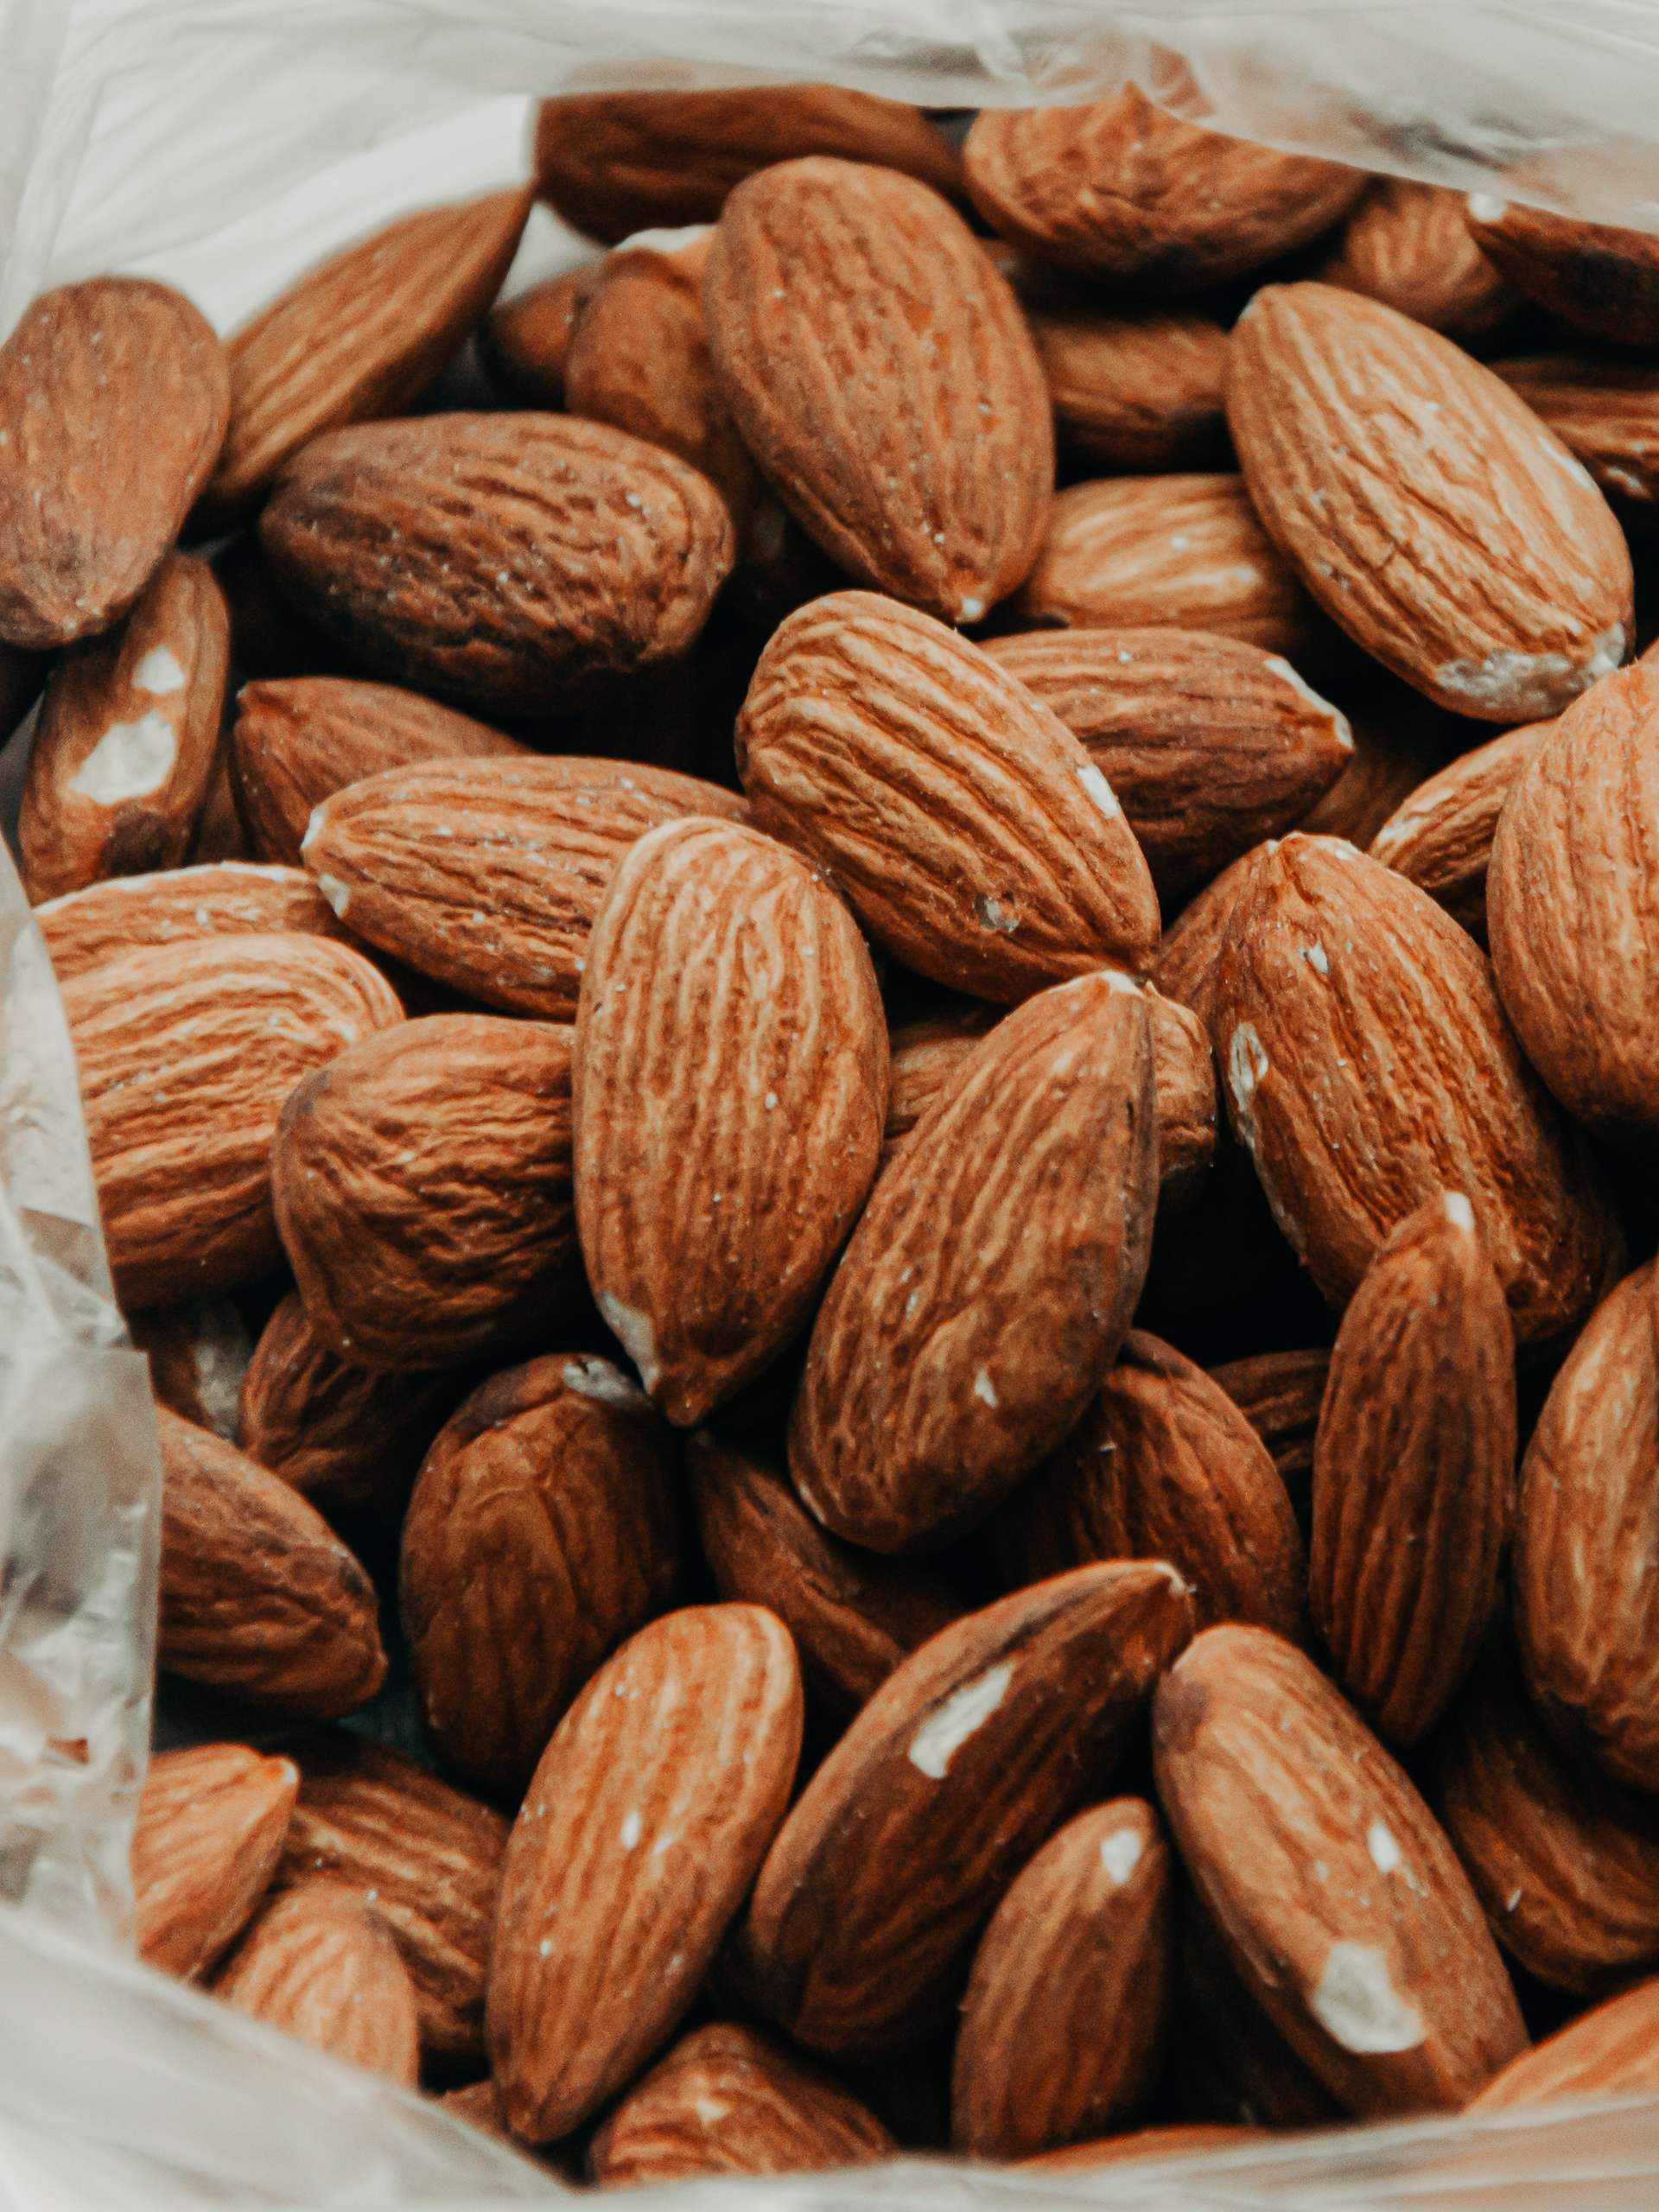 4 Reasons Almonds Are The Healthiest Nuts